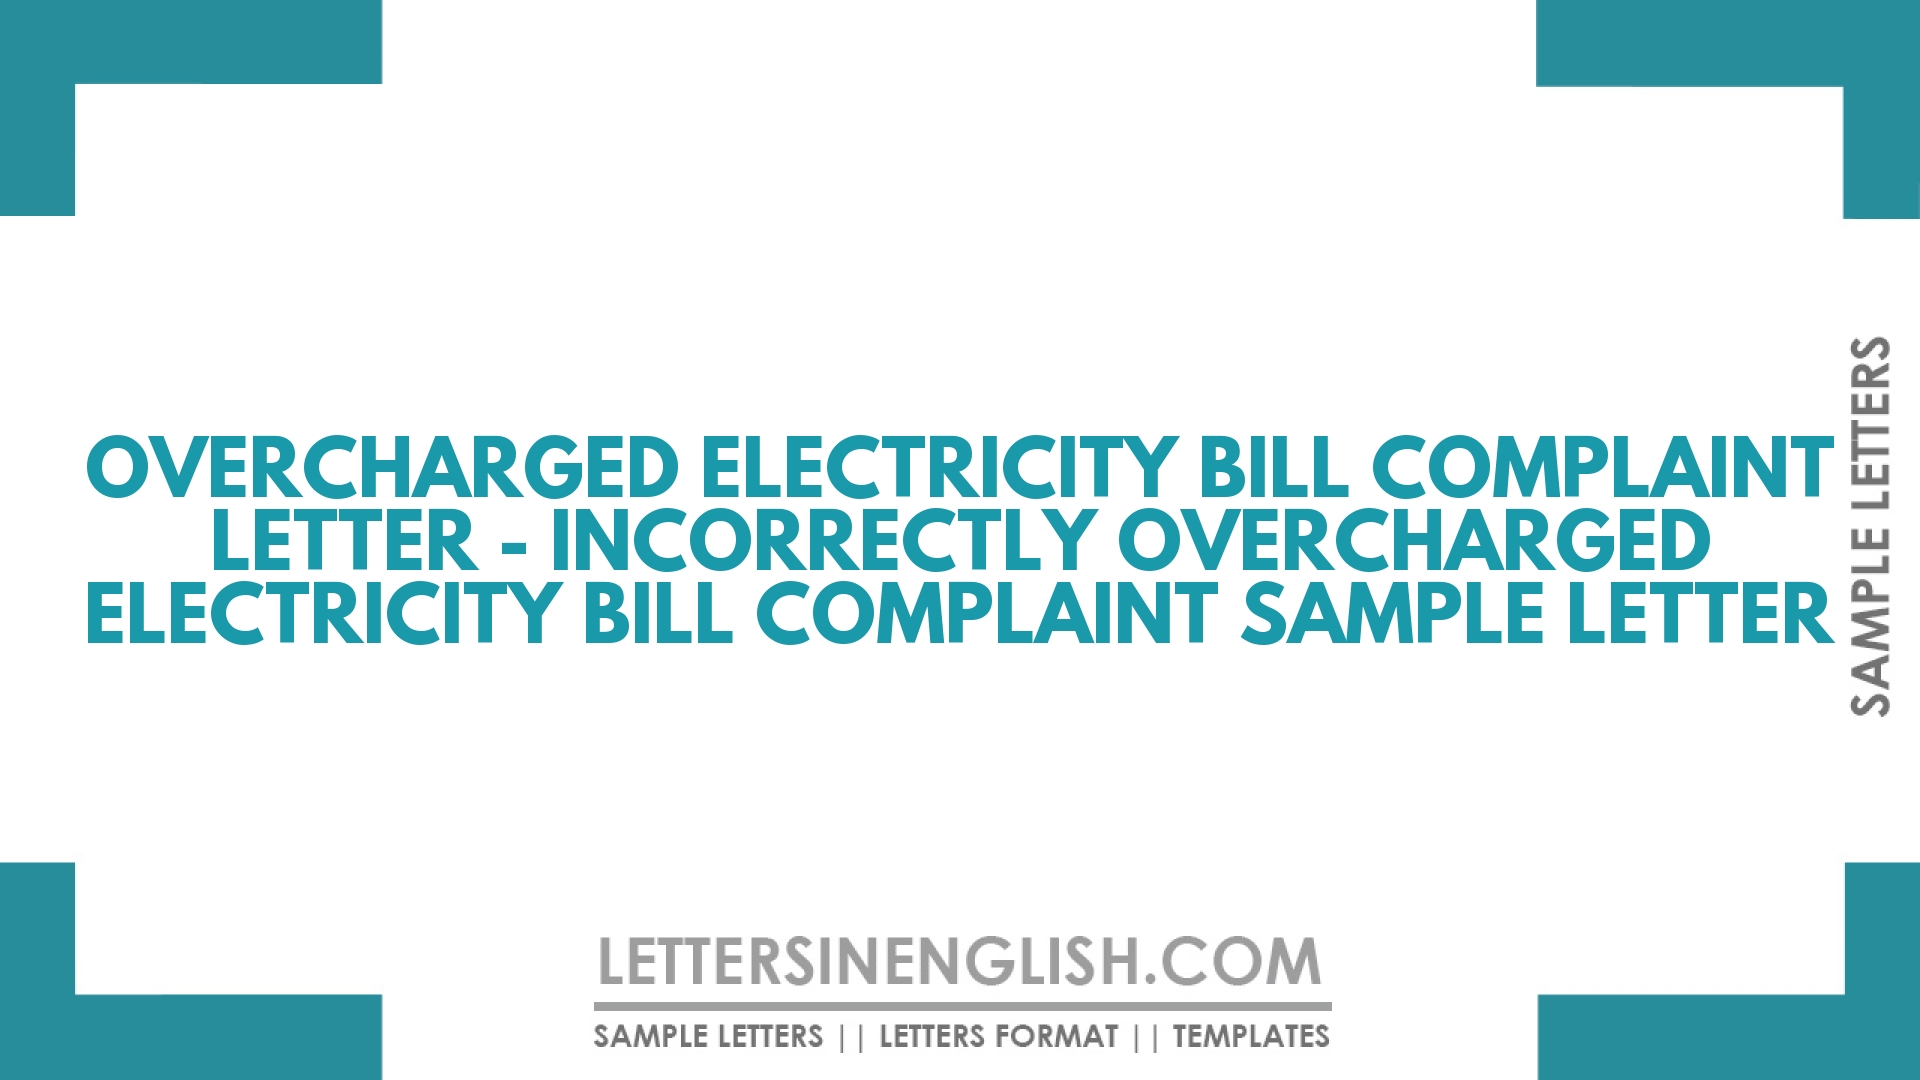 Overcharged Electricity Bill Complaint Letter – Incorrectly Overcharged Electricity Bill Complaint Sample Letter